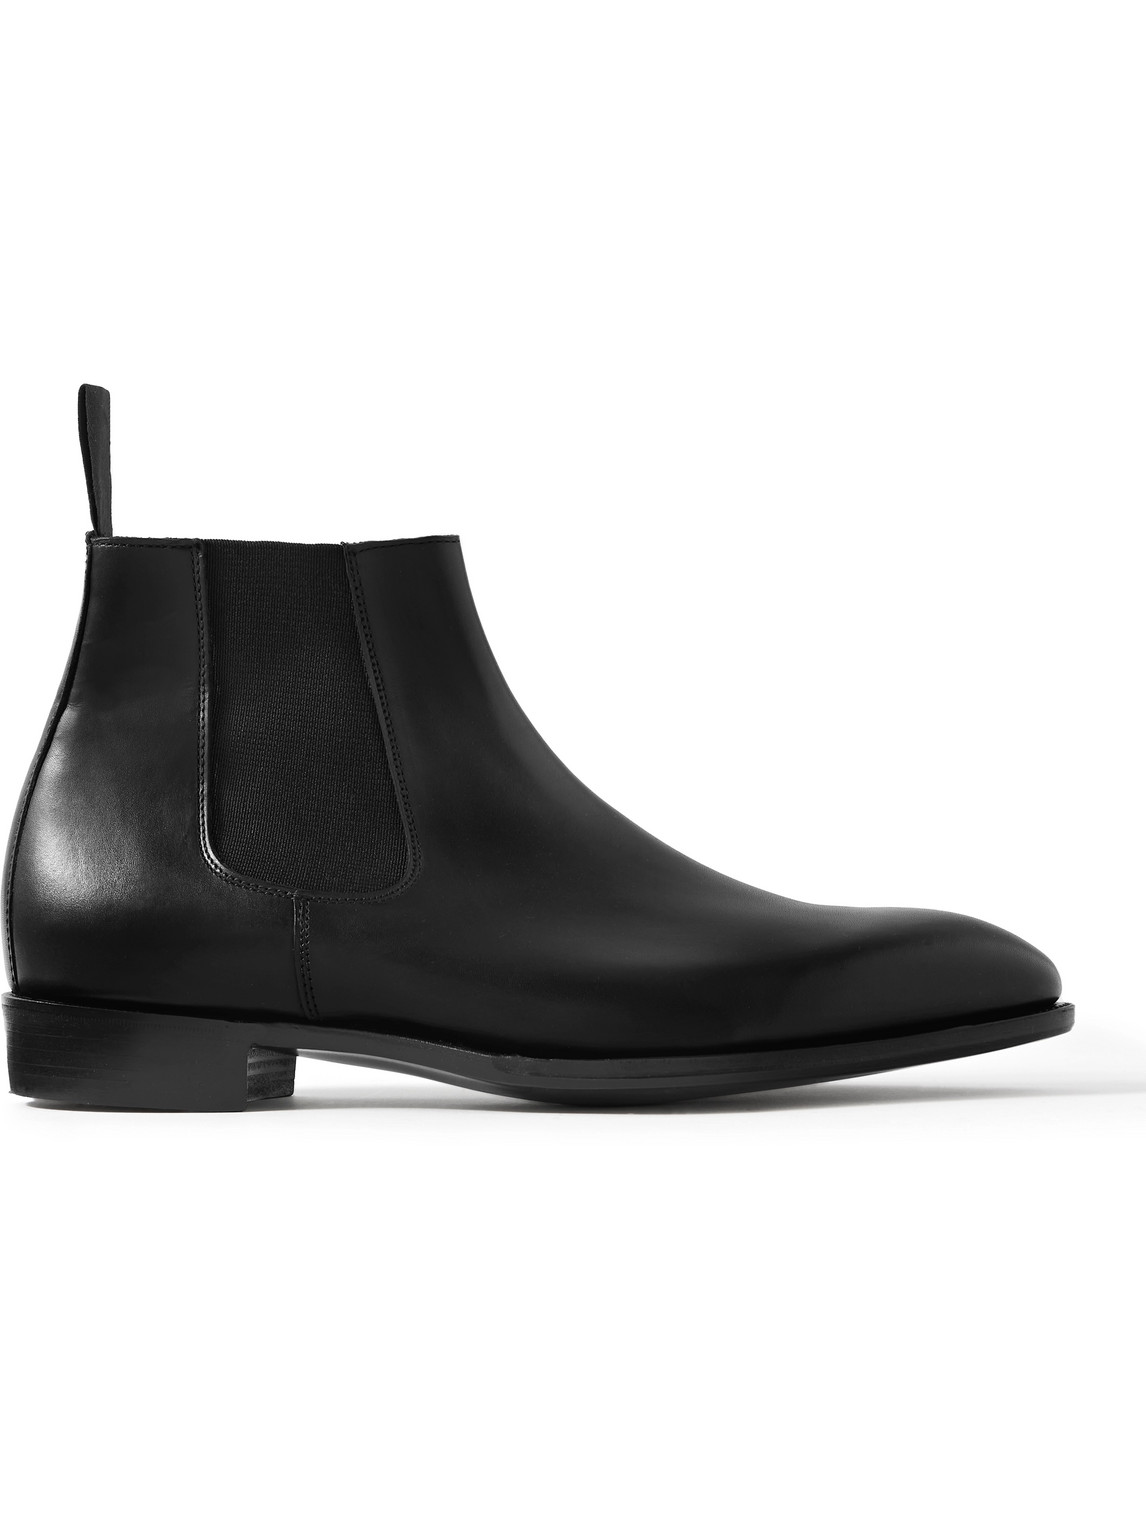 George Cleverley - Jason Leather Chelsea Boots - Men - Black - UK 10 von George Cleverley